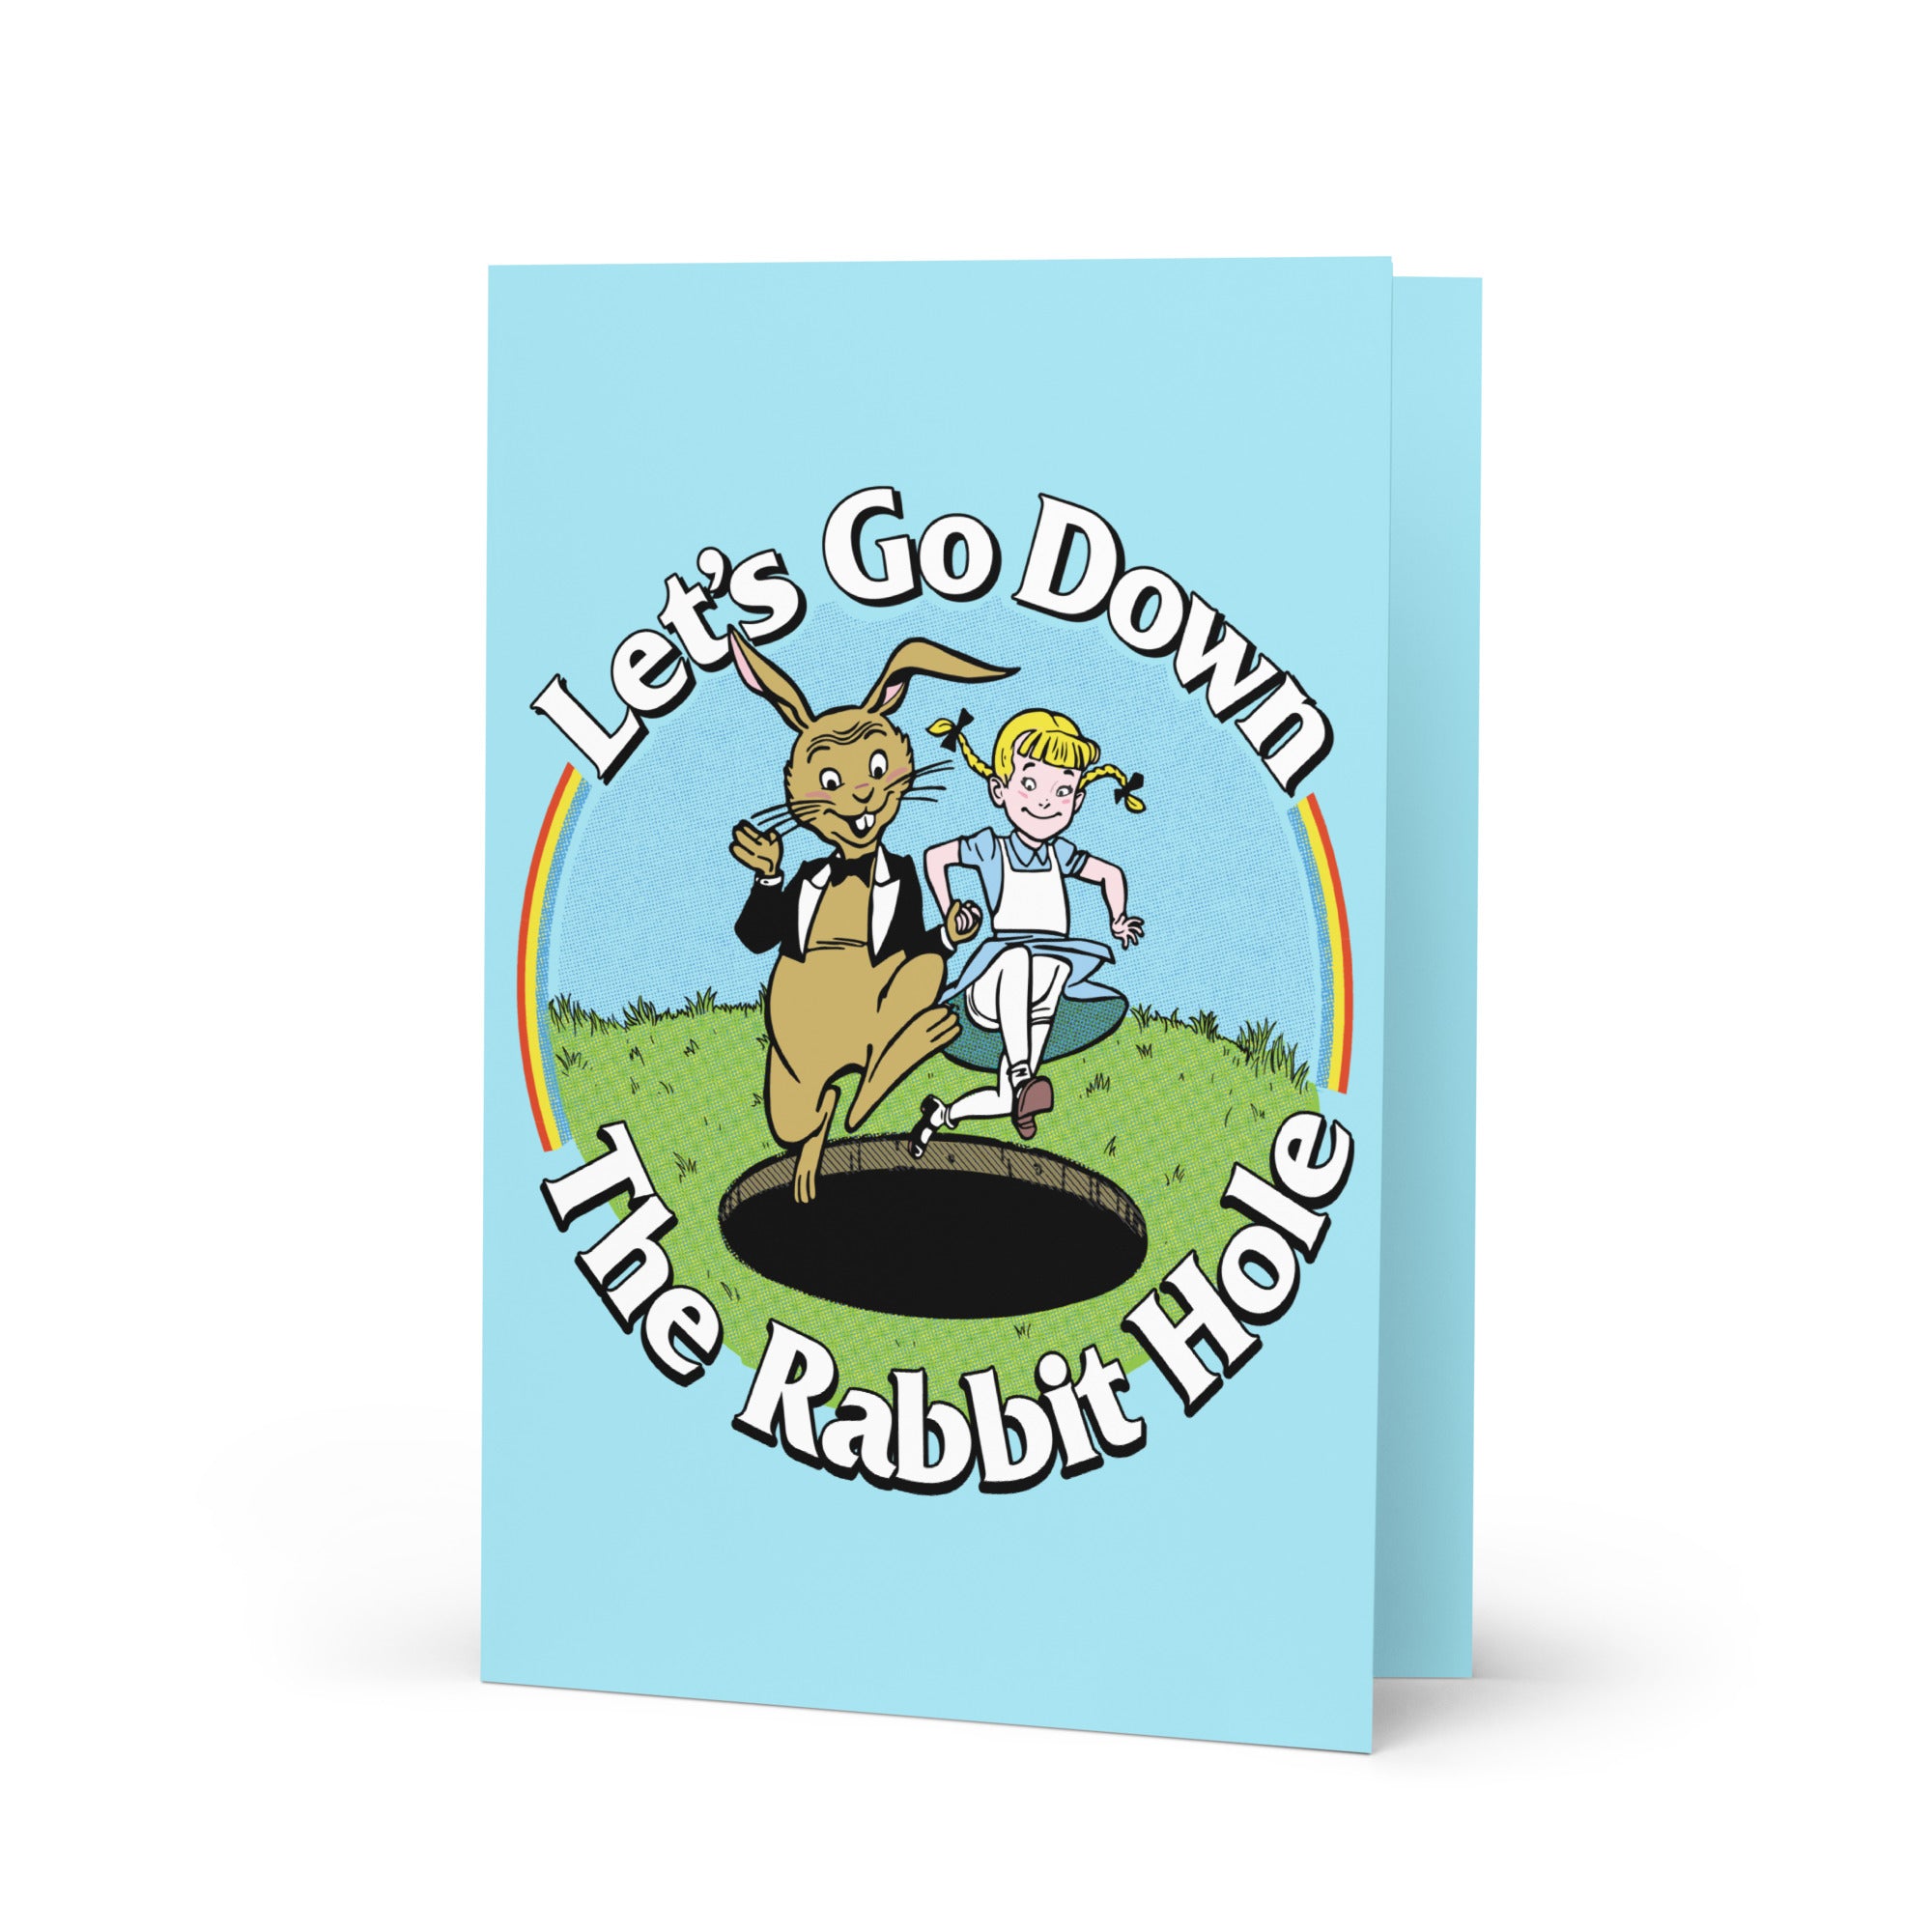 Let's Go Down the Rabbit Hole Greeting Card